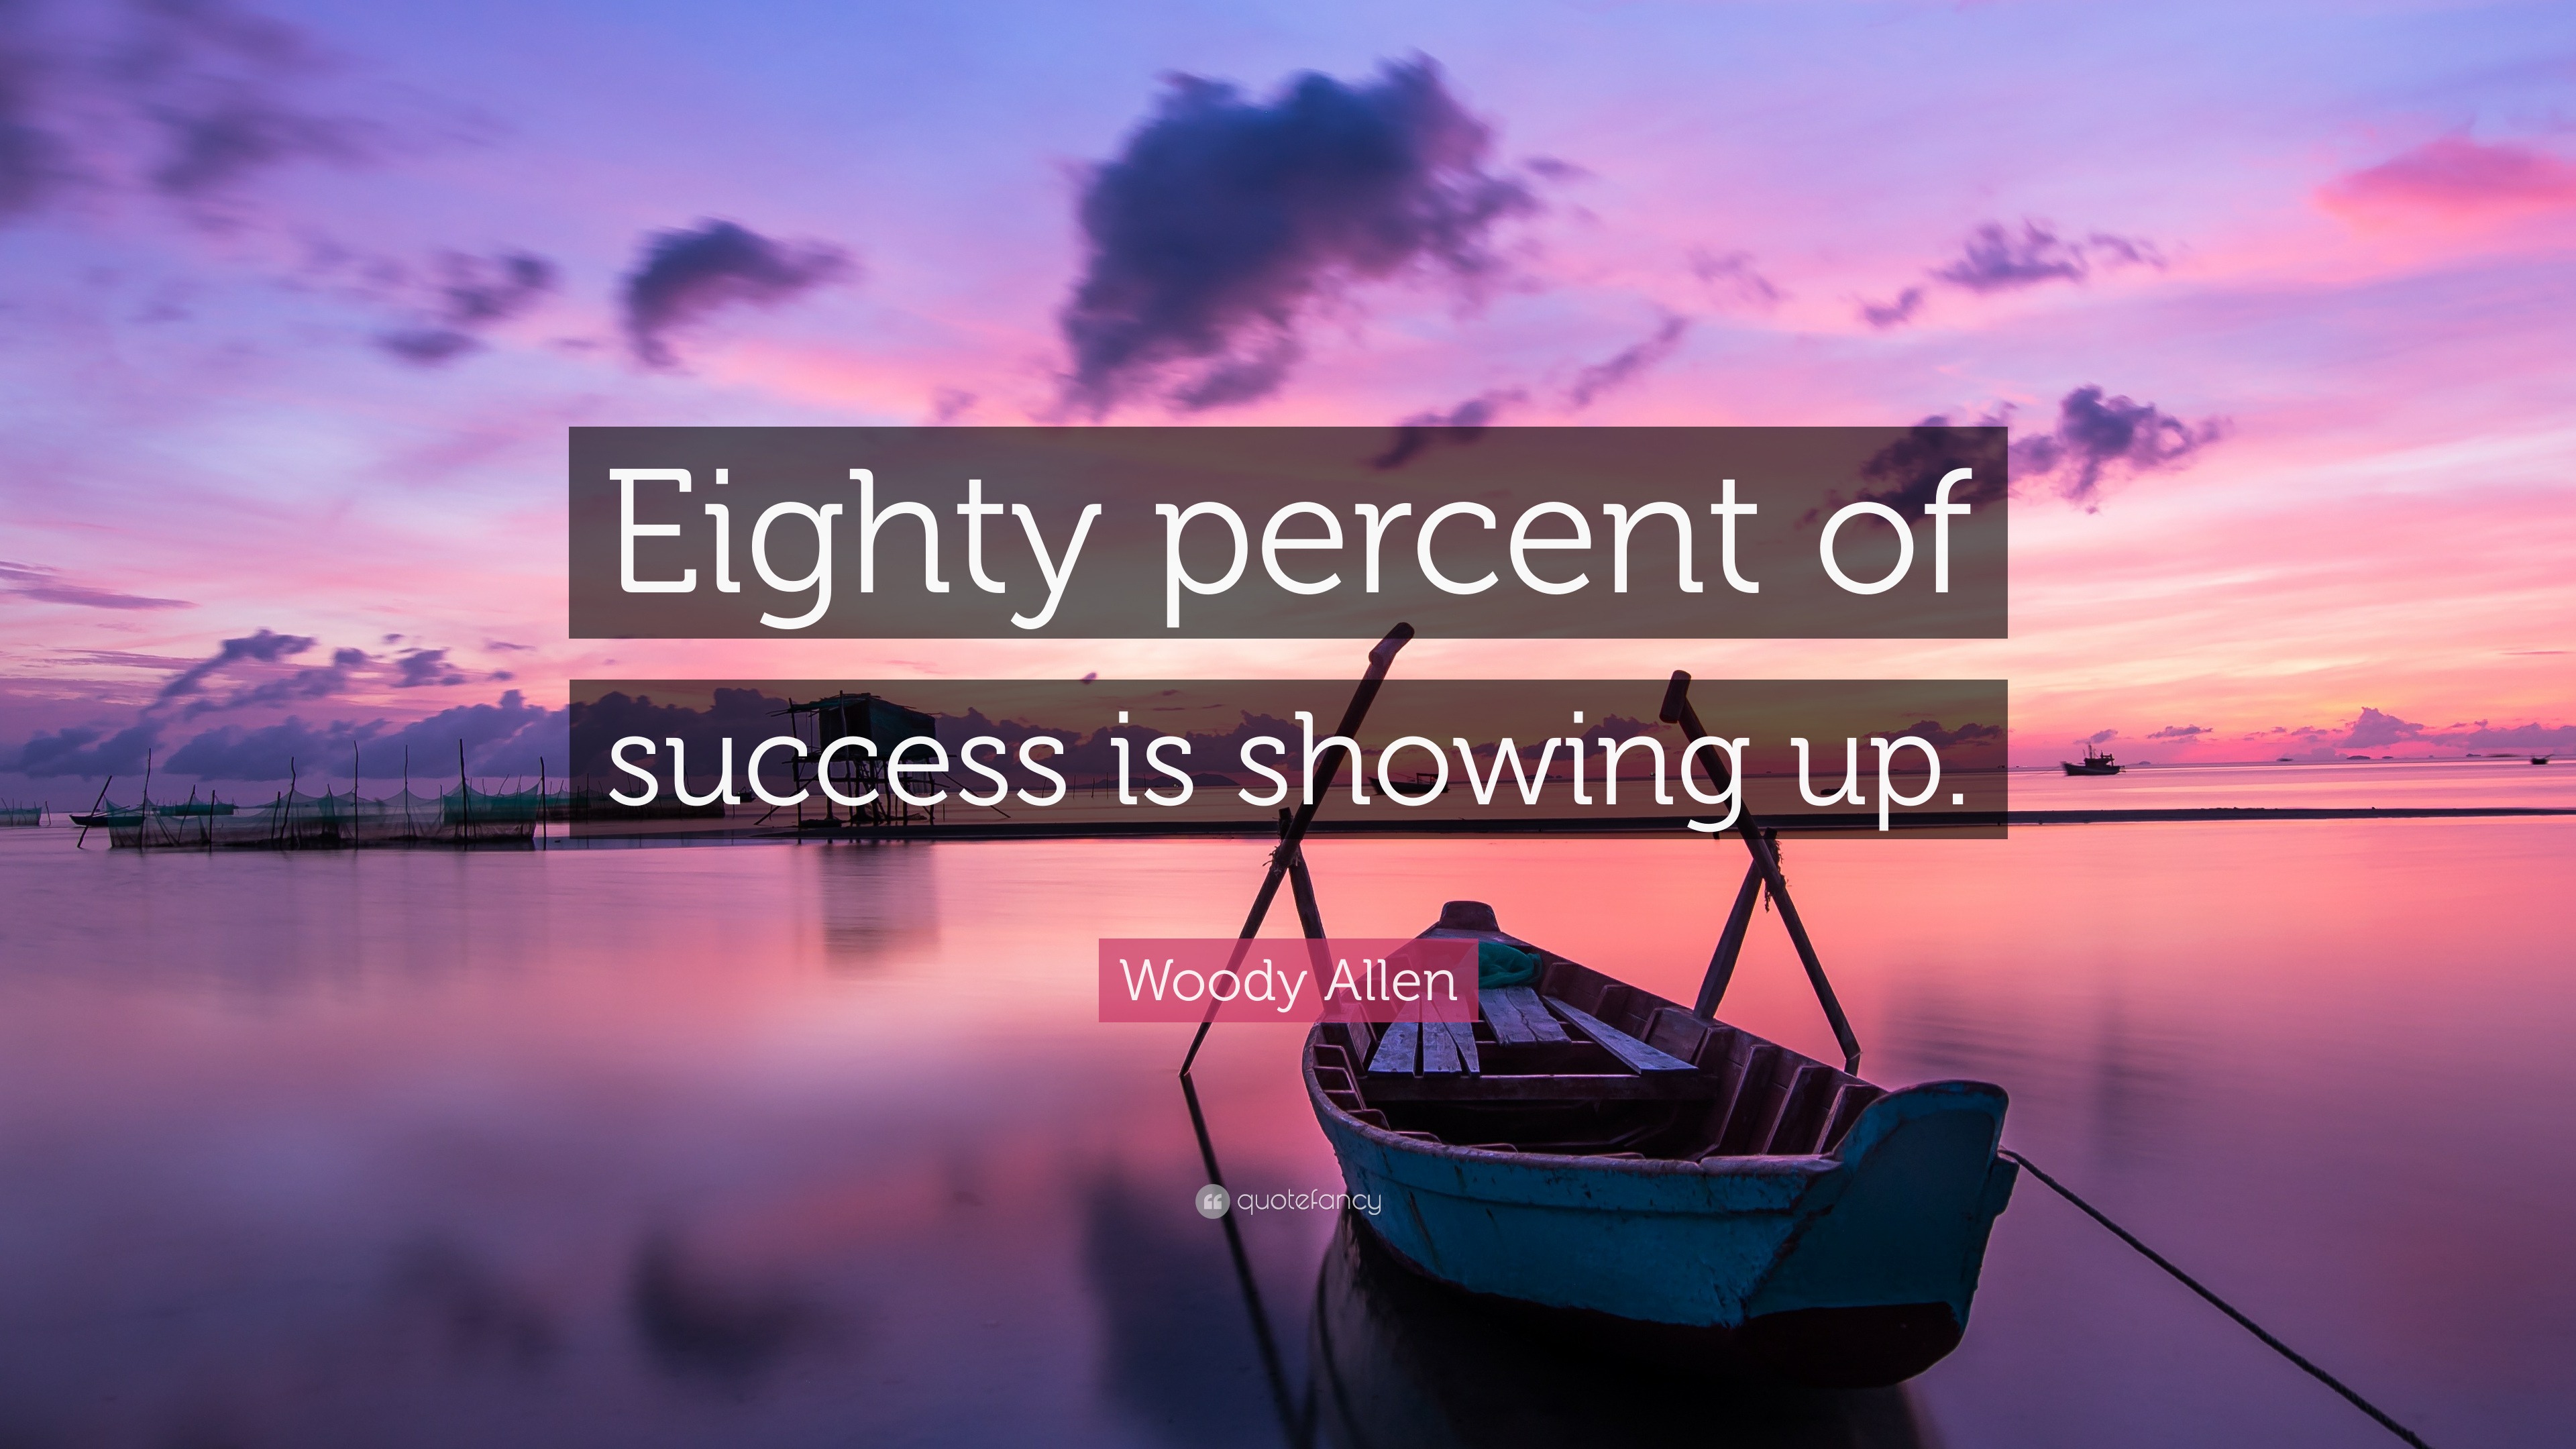 Woody Allen Quote “eighty Percent Of Success Is Showing Up” 23 Wallpapers Quotefancy 8313